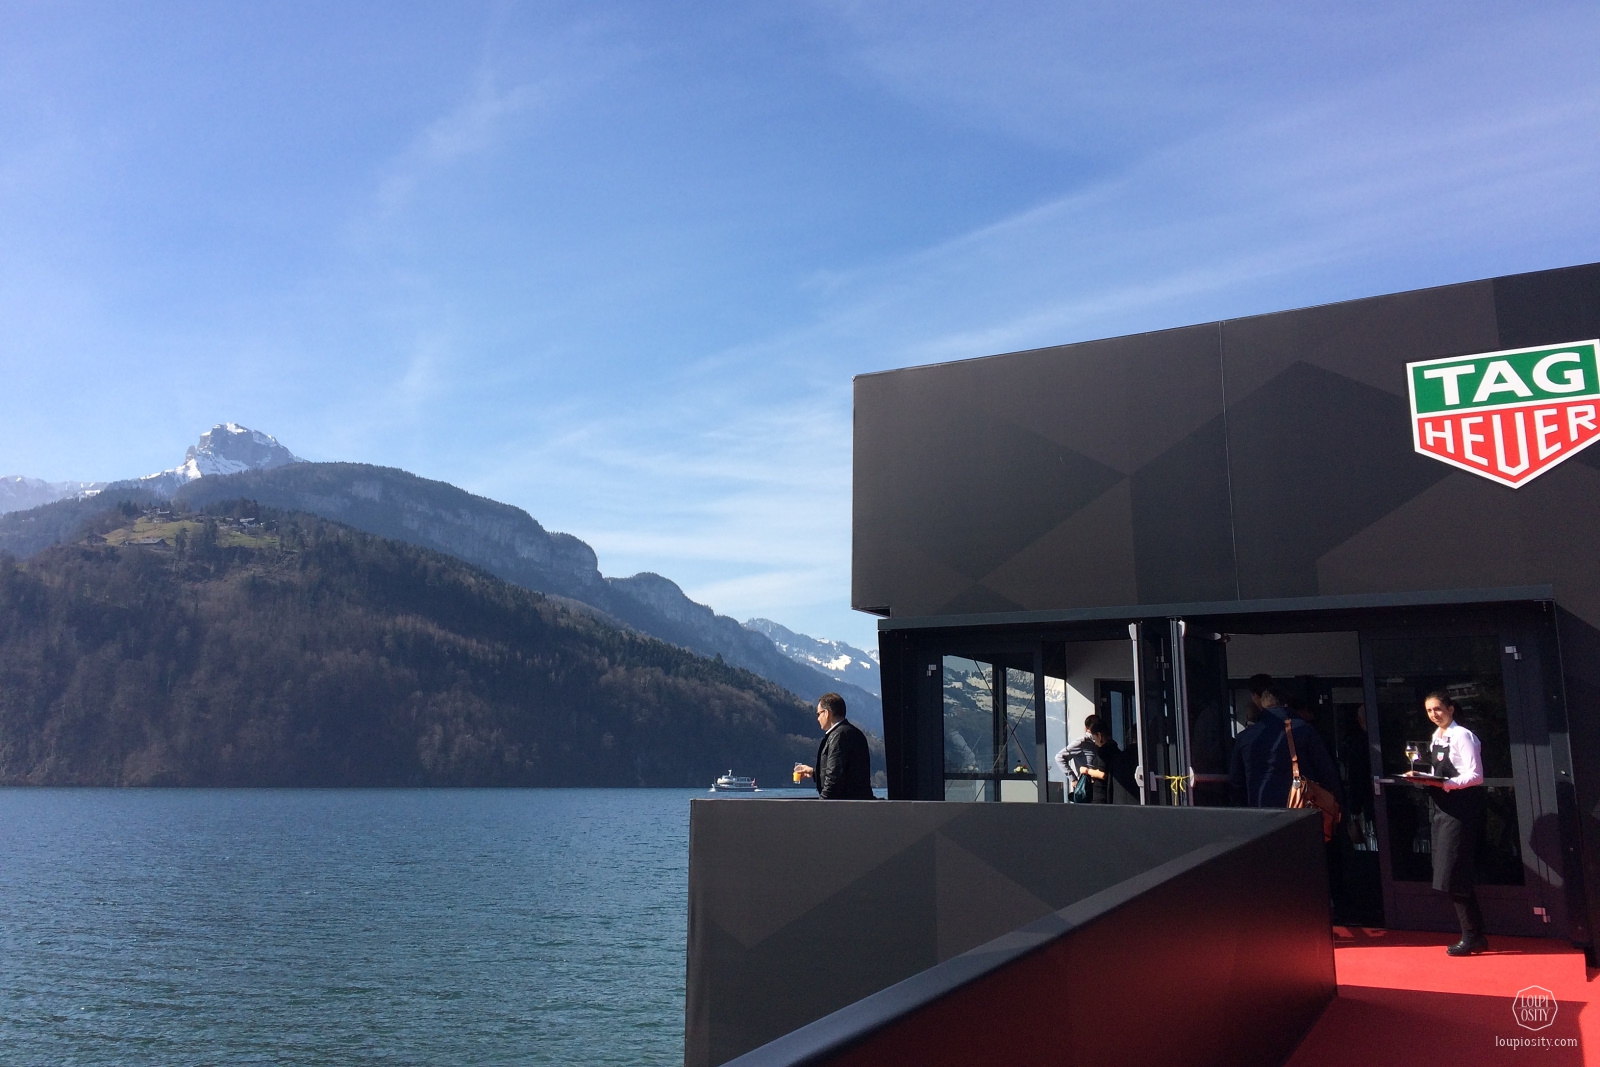 View from Brunnen, at the Lake Lucerne and the TAG Heuer booth